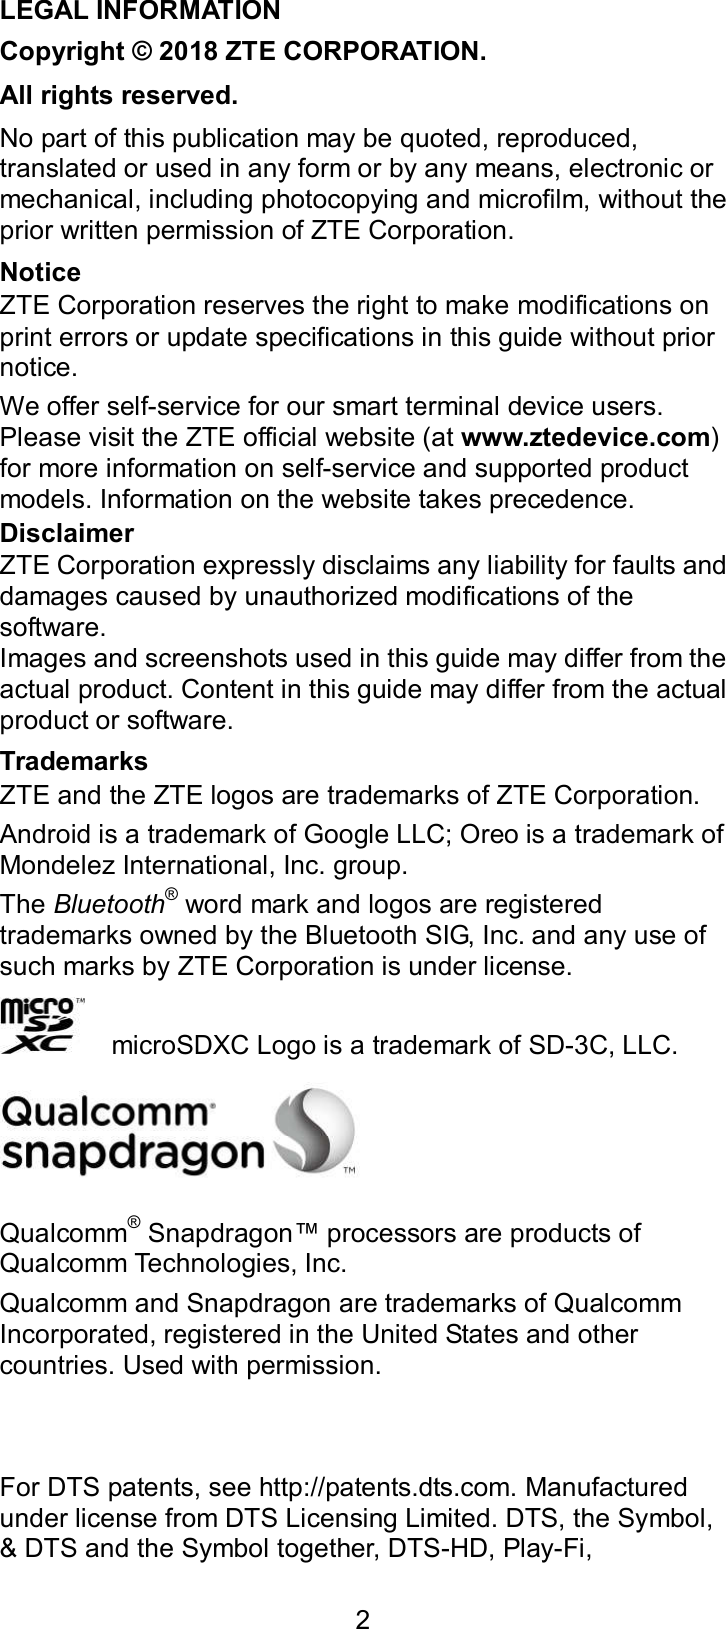  2 LEGAL INFORMATION Copyright © 2018 ZTE CORPORATION. All rights reserved. No part of this publication may be quoted, reproduced, translated or used in any form or by any means, electronic or mechanical, including photocopying and microfilm, without the prior written permission of ZTE Corporation. Notice ZTE Corporation reserves the right to make modifications on print errors or update specifications in this guide without prior notice. We offer self-service for our smart terminal device users. Please visit the ZTE official website (at www.ztedevice.com) for more information on self-service and supported product models. Information on the website takes precedence. Disclaimer ZTE Corporation expressly disclaims any liability for faults and damages caused by unauthorized modifications of the software. Images and screenshots used in this guide may differ from the actual product. Content in this guide may differ from the actual product or software. Trademarks ZTE and the ZTE logos are trademarks of ZTE Corporation. Android is a trademark of Google LLC; Oreo is a trademark of Mondelez International, Inc. group. The Bluetooth® word mark and logos are registered trademarks owned by the Bluetooth SIG, Inc. and any use of such marks by ZTE Corporation is under license.       microSDXC Logo is a trademark of SD-3C, LLC.  Qualcomm® Snapdragon™ processors are products of Qualcomm Technologies, Inc.   Qualcomm and Snapdragon are trademarks of Qualcomm Incorporated, registered in the United States and other countries. Used with permission.     For DTS patents, see http://patents.dts.com. Manufactured under license from DTS Licensing Limited. DTS, the Symbol, &amp; DTS and the Symbol together, DTS-HD, Play-Fi, 